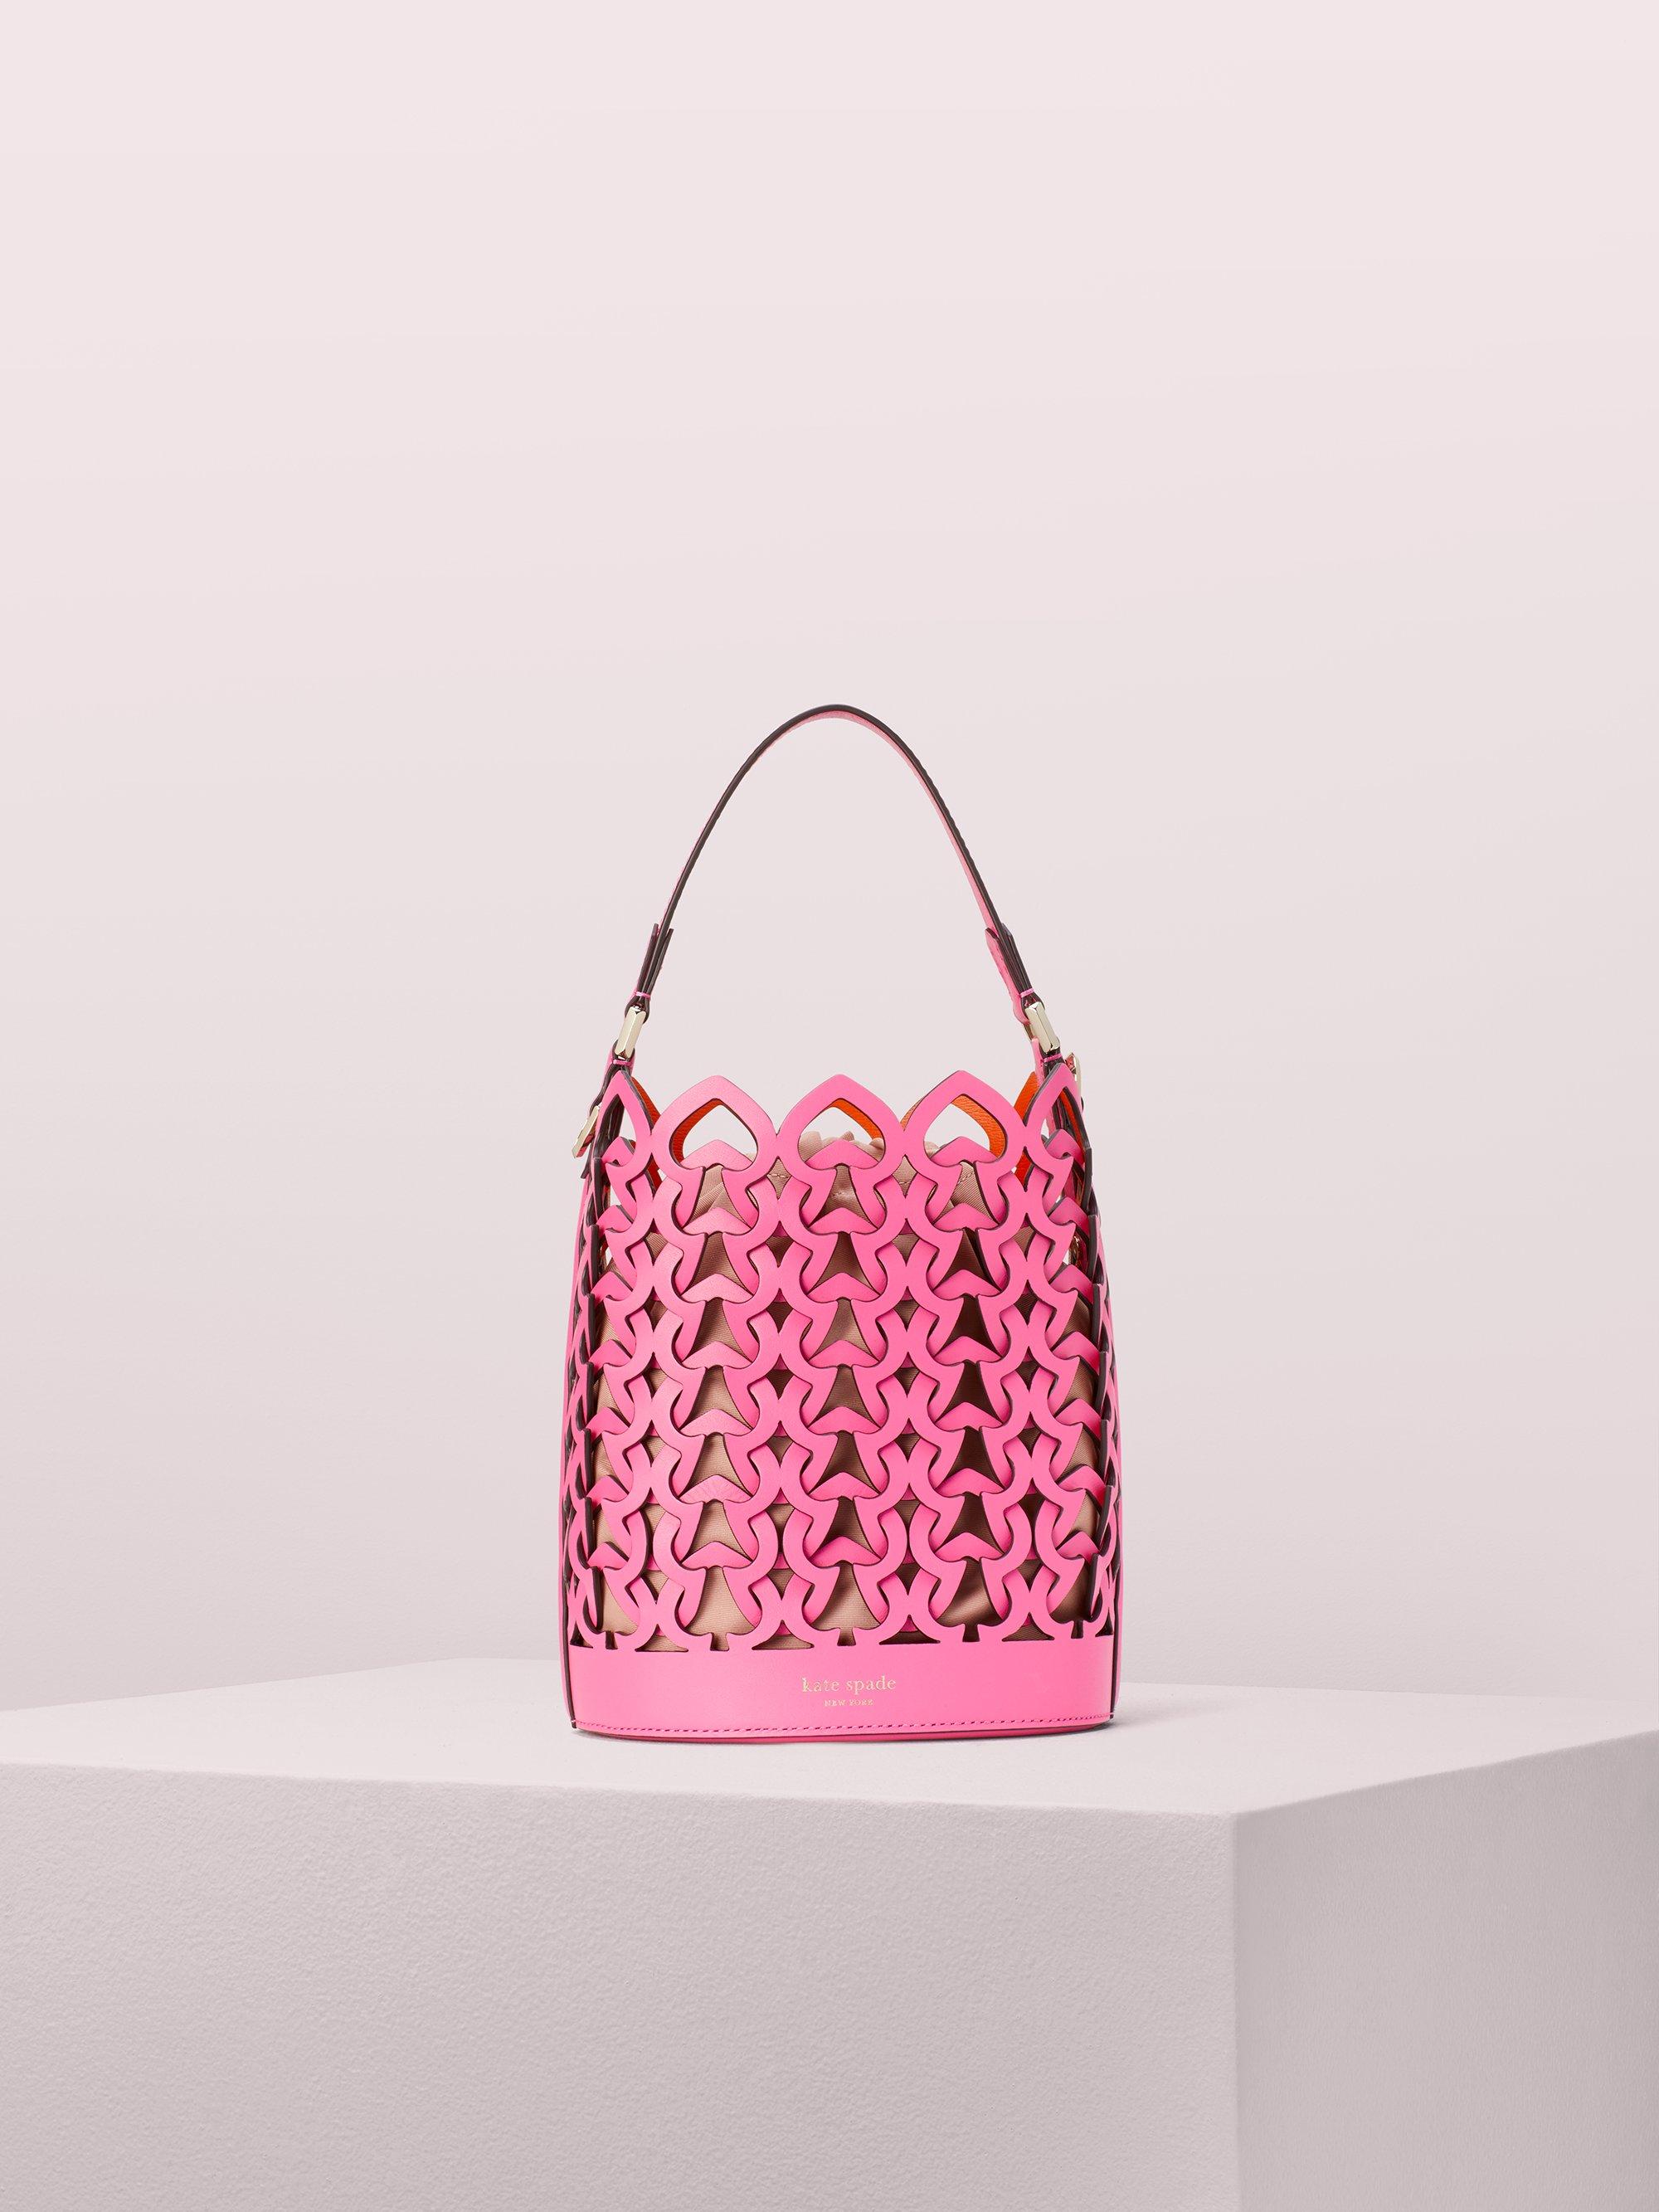 Kate Spade Dorie Small Bucket Bag in Pink - Lyst